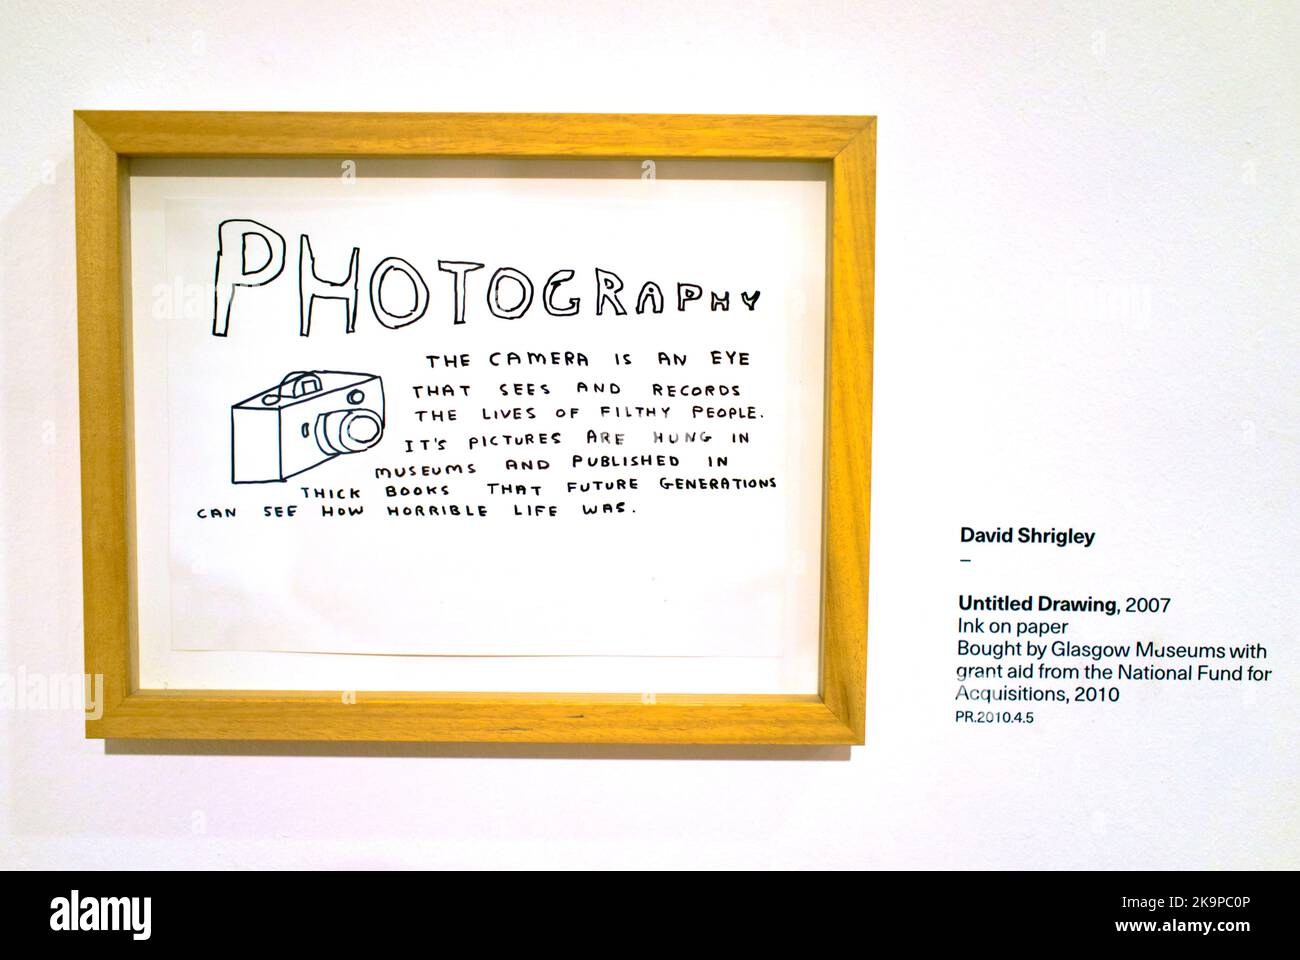 Photography David Shrigley untitled drawing 2007 at the goma or. Glasgow museum of modern art Stock Photo